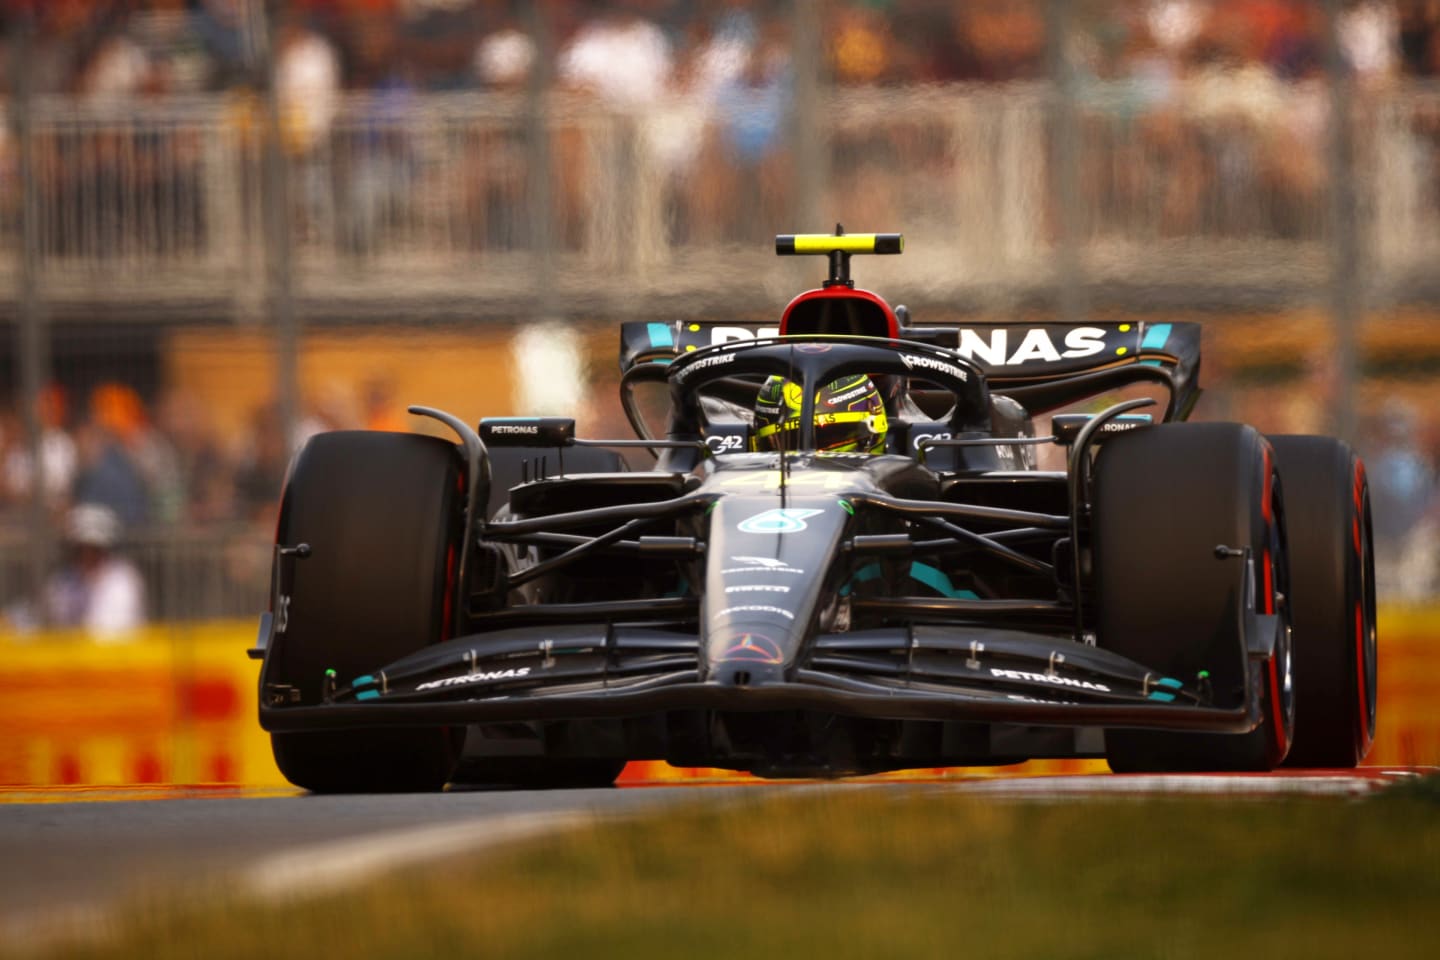 MONTREAL, QUEBEC - JUNE 16: Lewis Hamilton of Great Britain driving the (44) Mercedes AMG Petronas